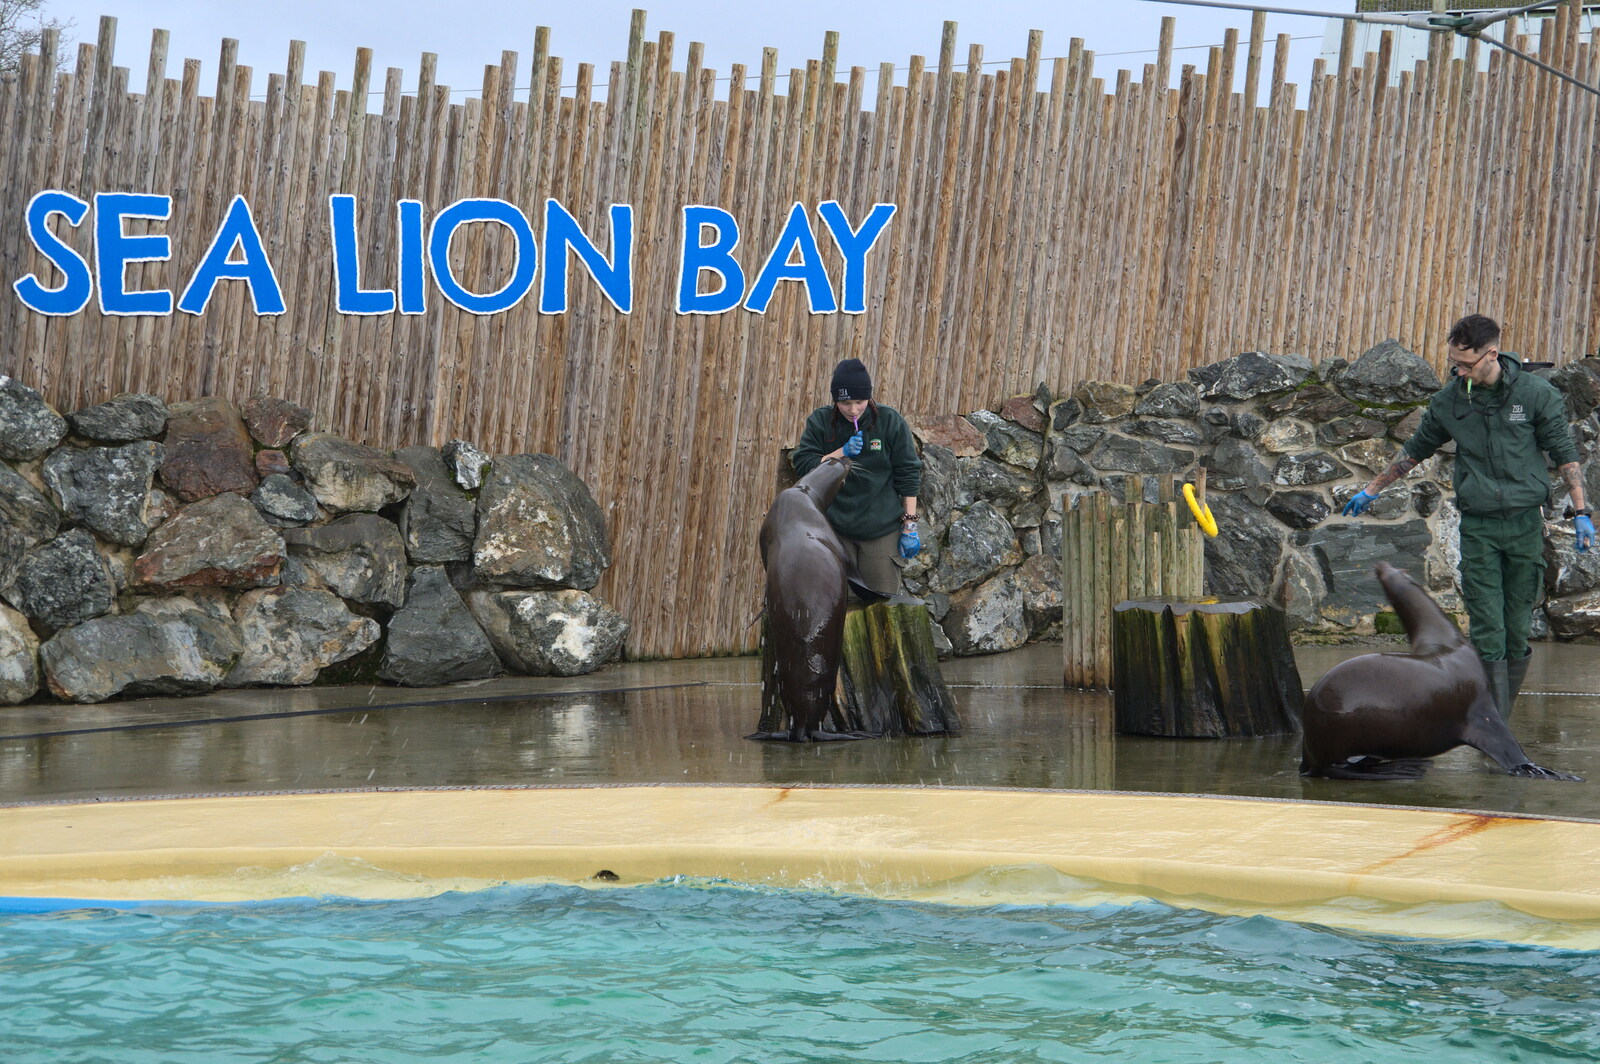 A Few Hours at the Zoo, Banham, Norfolk - 8th January 2023: There's a talk at the sea lion enclosure